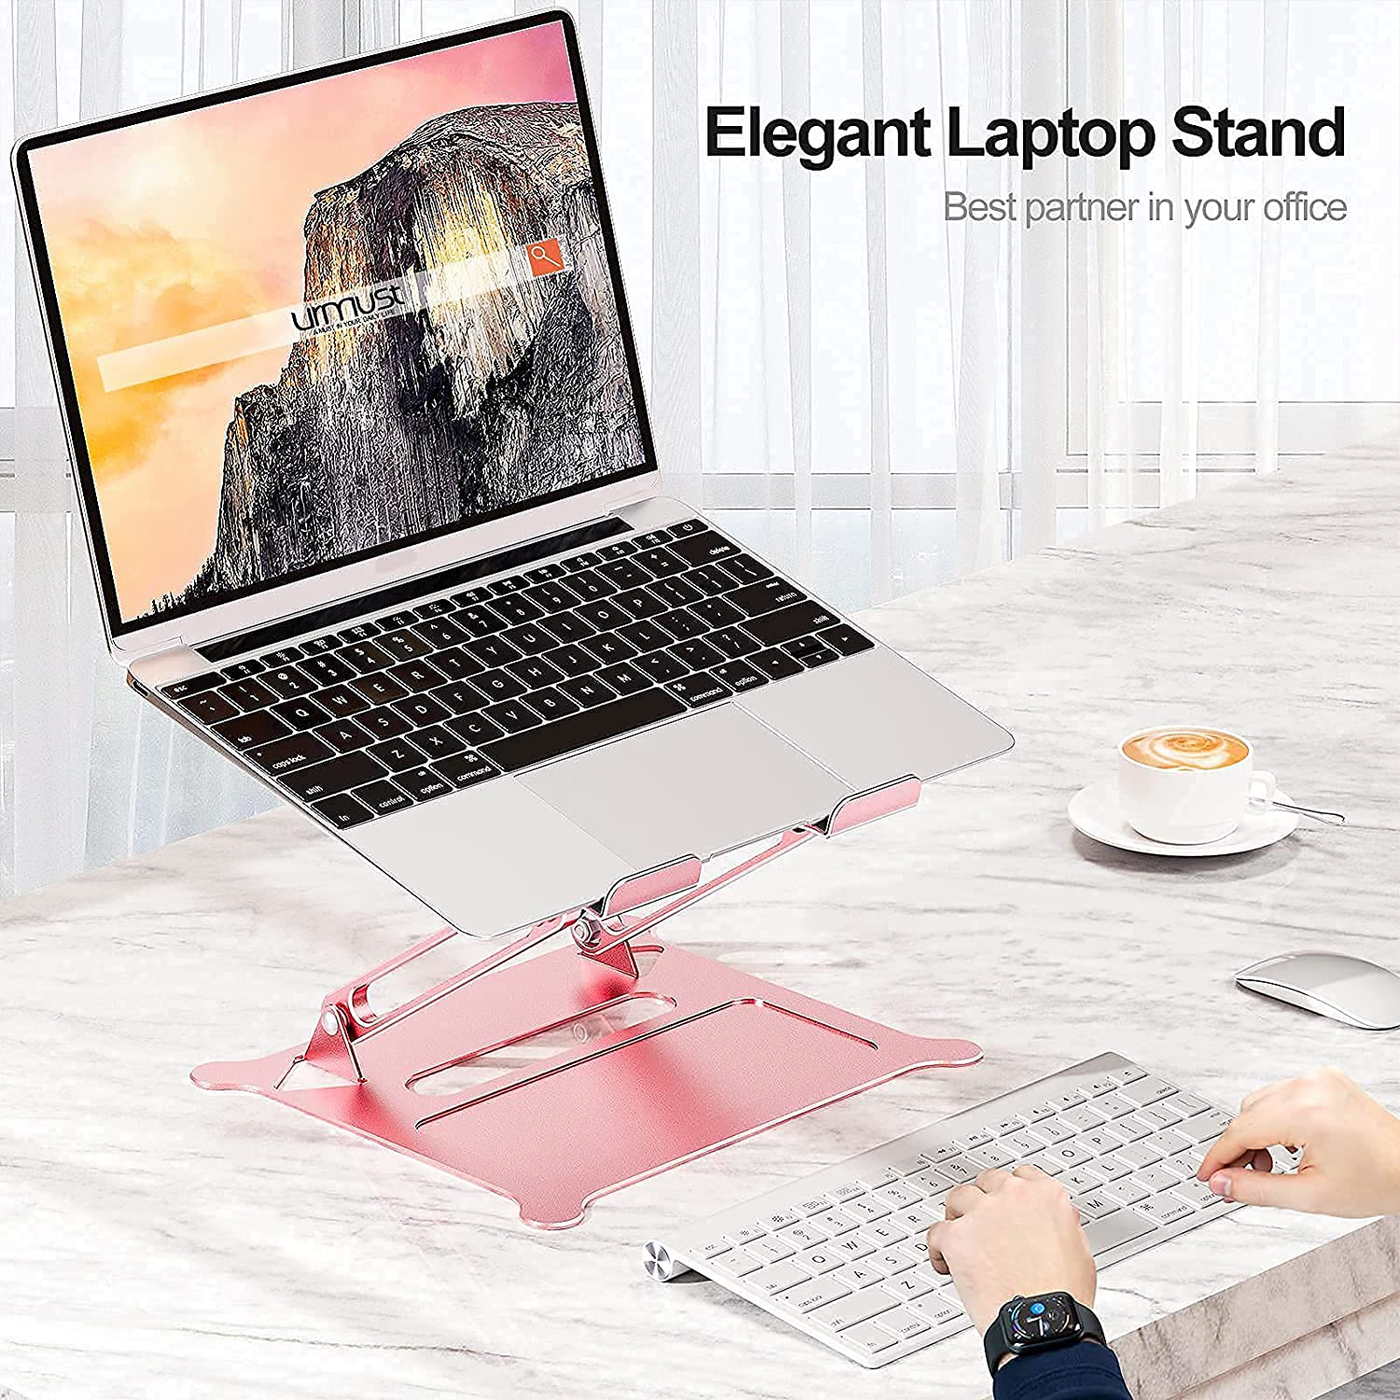 Urmust Laptop Notebook Stand Holder Adjustable Ultrabook Stand Riser Portable Compatible with MacBook Air Pro HP Dell XPS Lenovo All laptops 10-15.6"(Rose Gold)